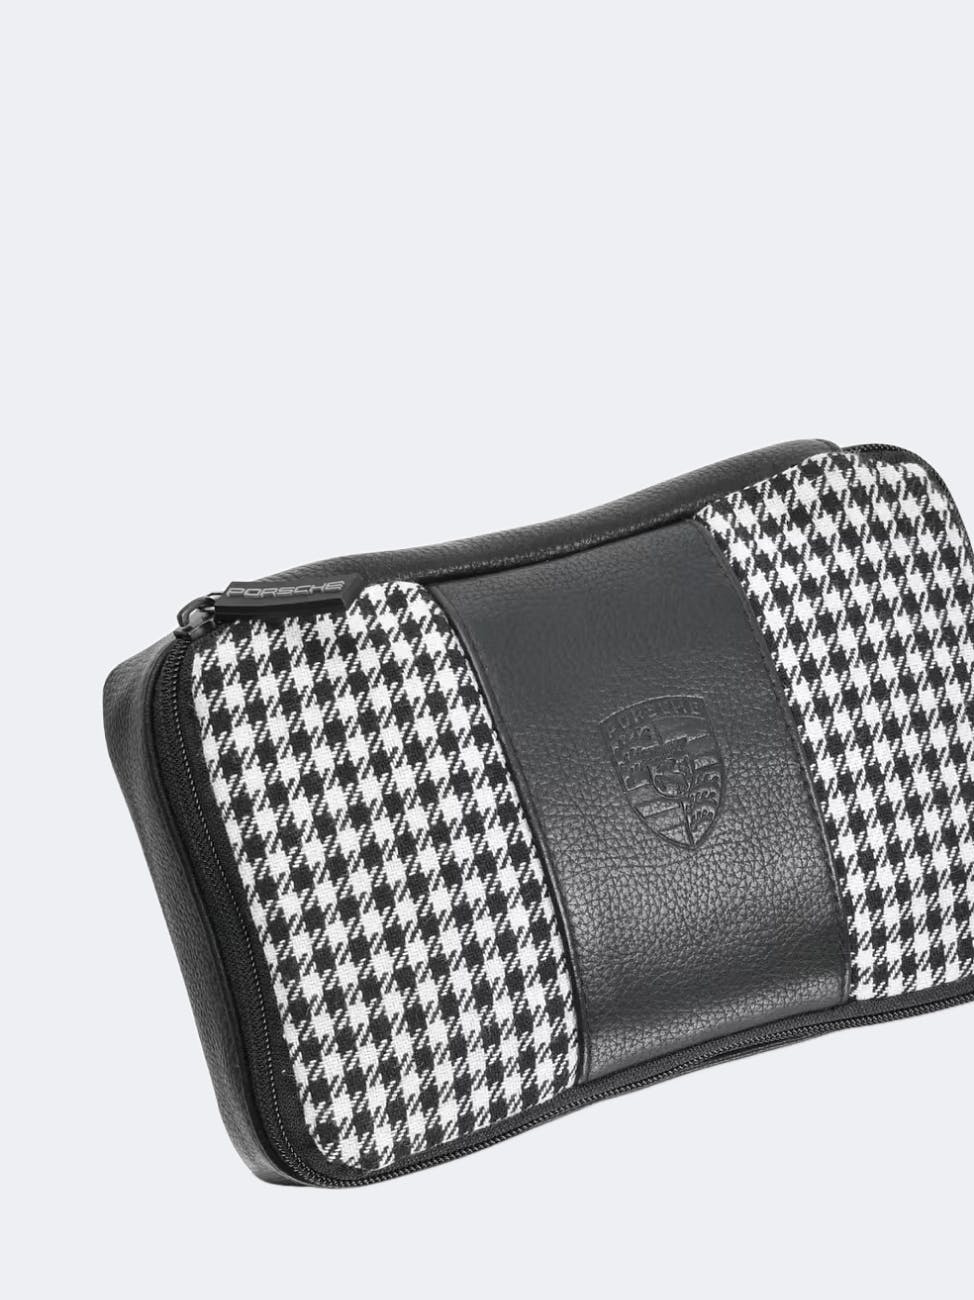 Porsche Classic First Aid Kit in black and white pattern